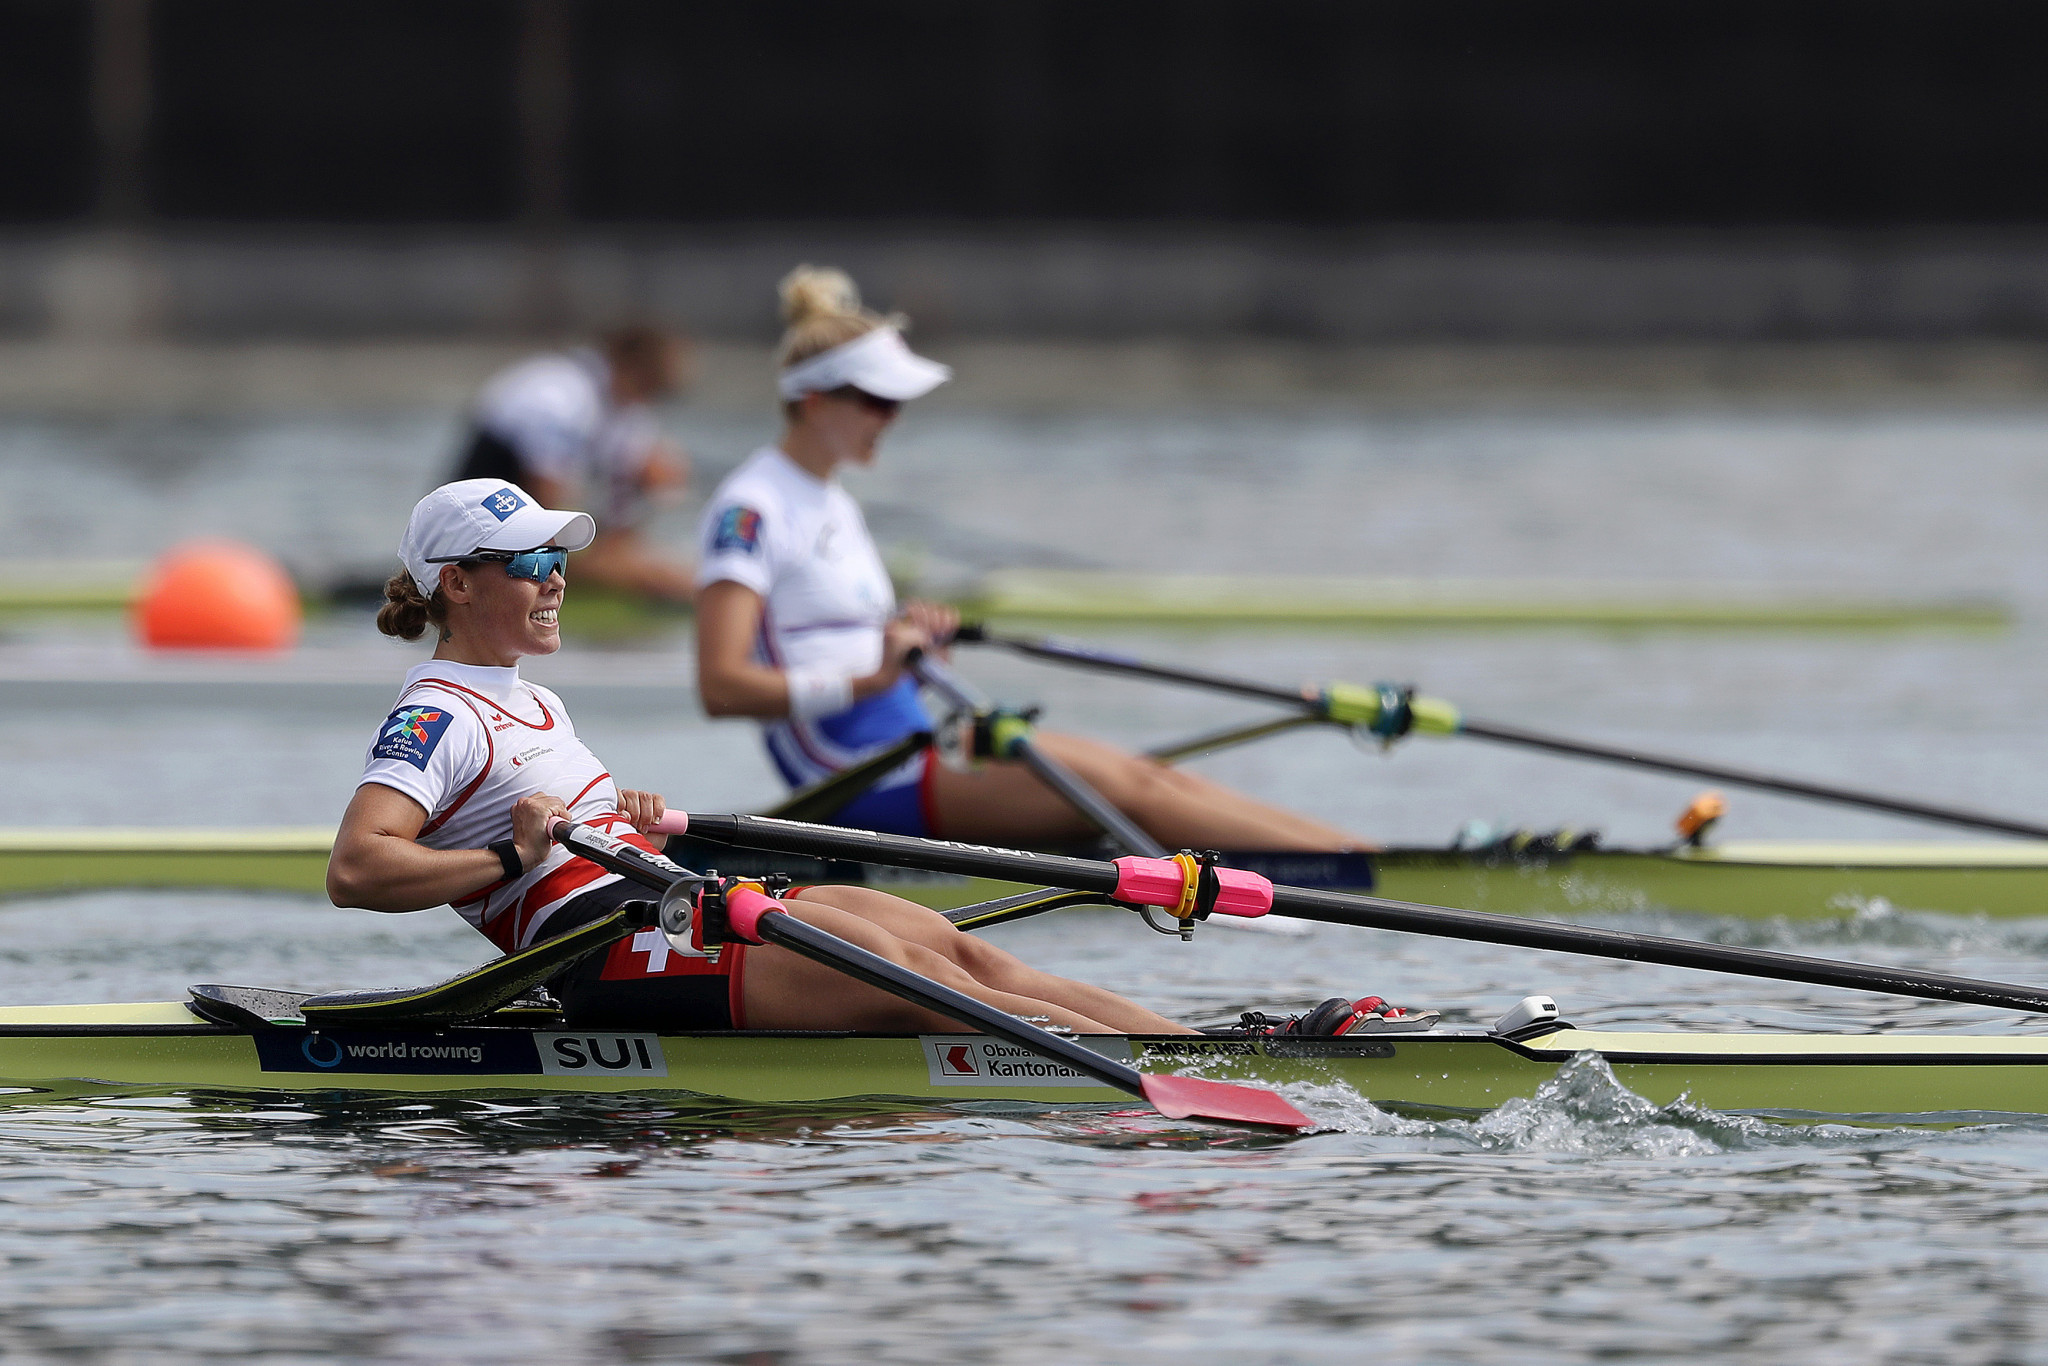 FISA is exploring the possibility of rescheduling the 2021 World Rowing Championships in Shanghai ©Getty Images